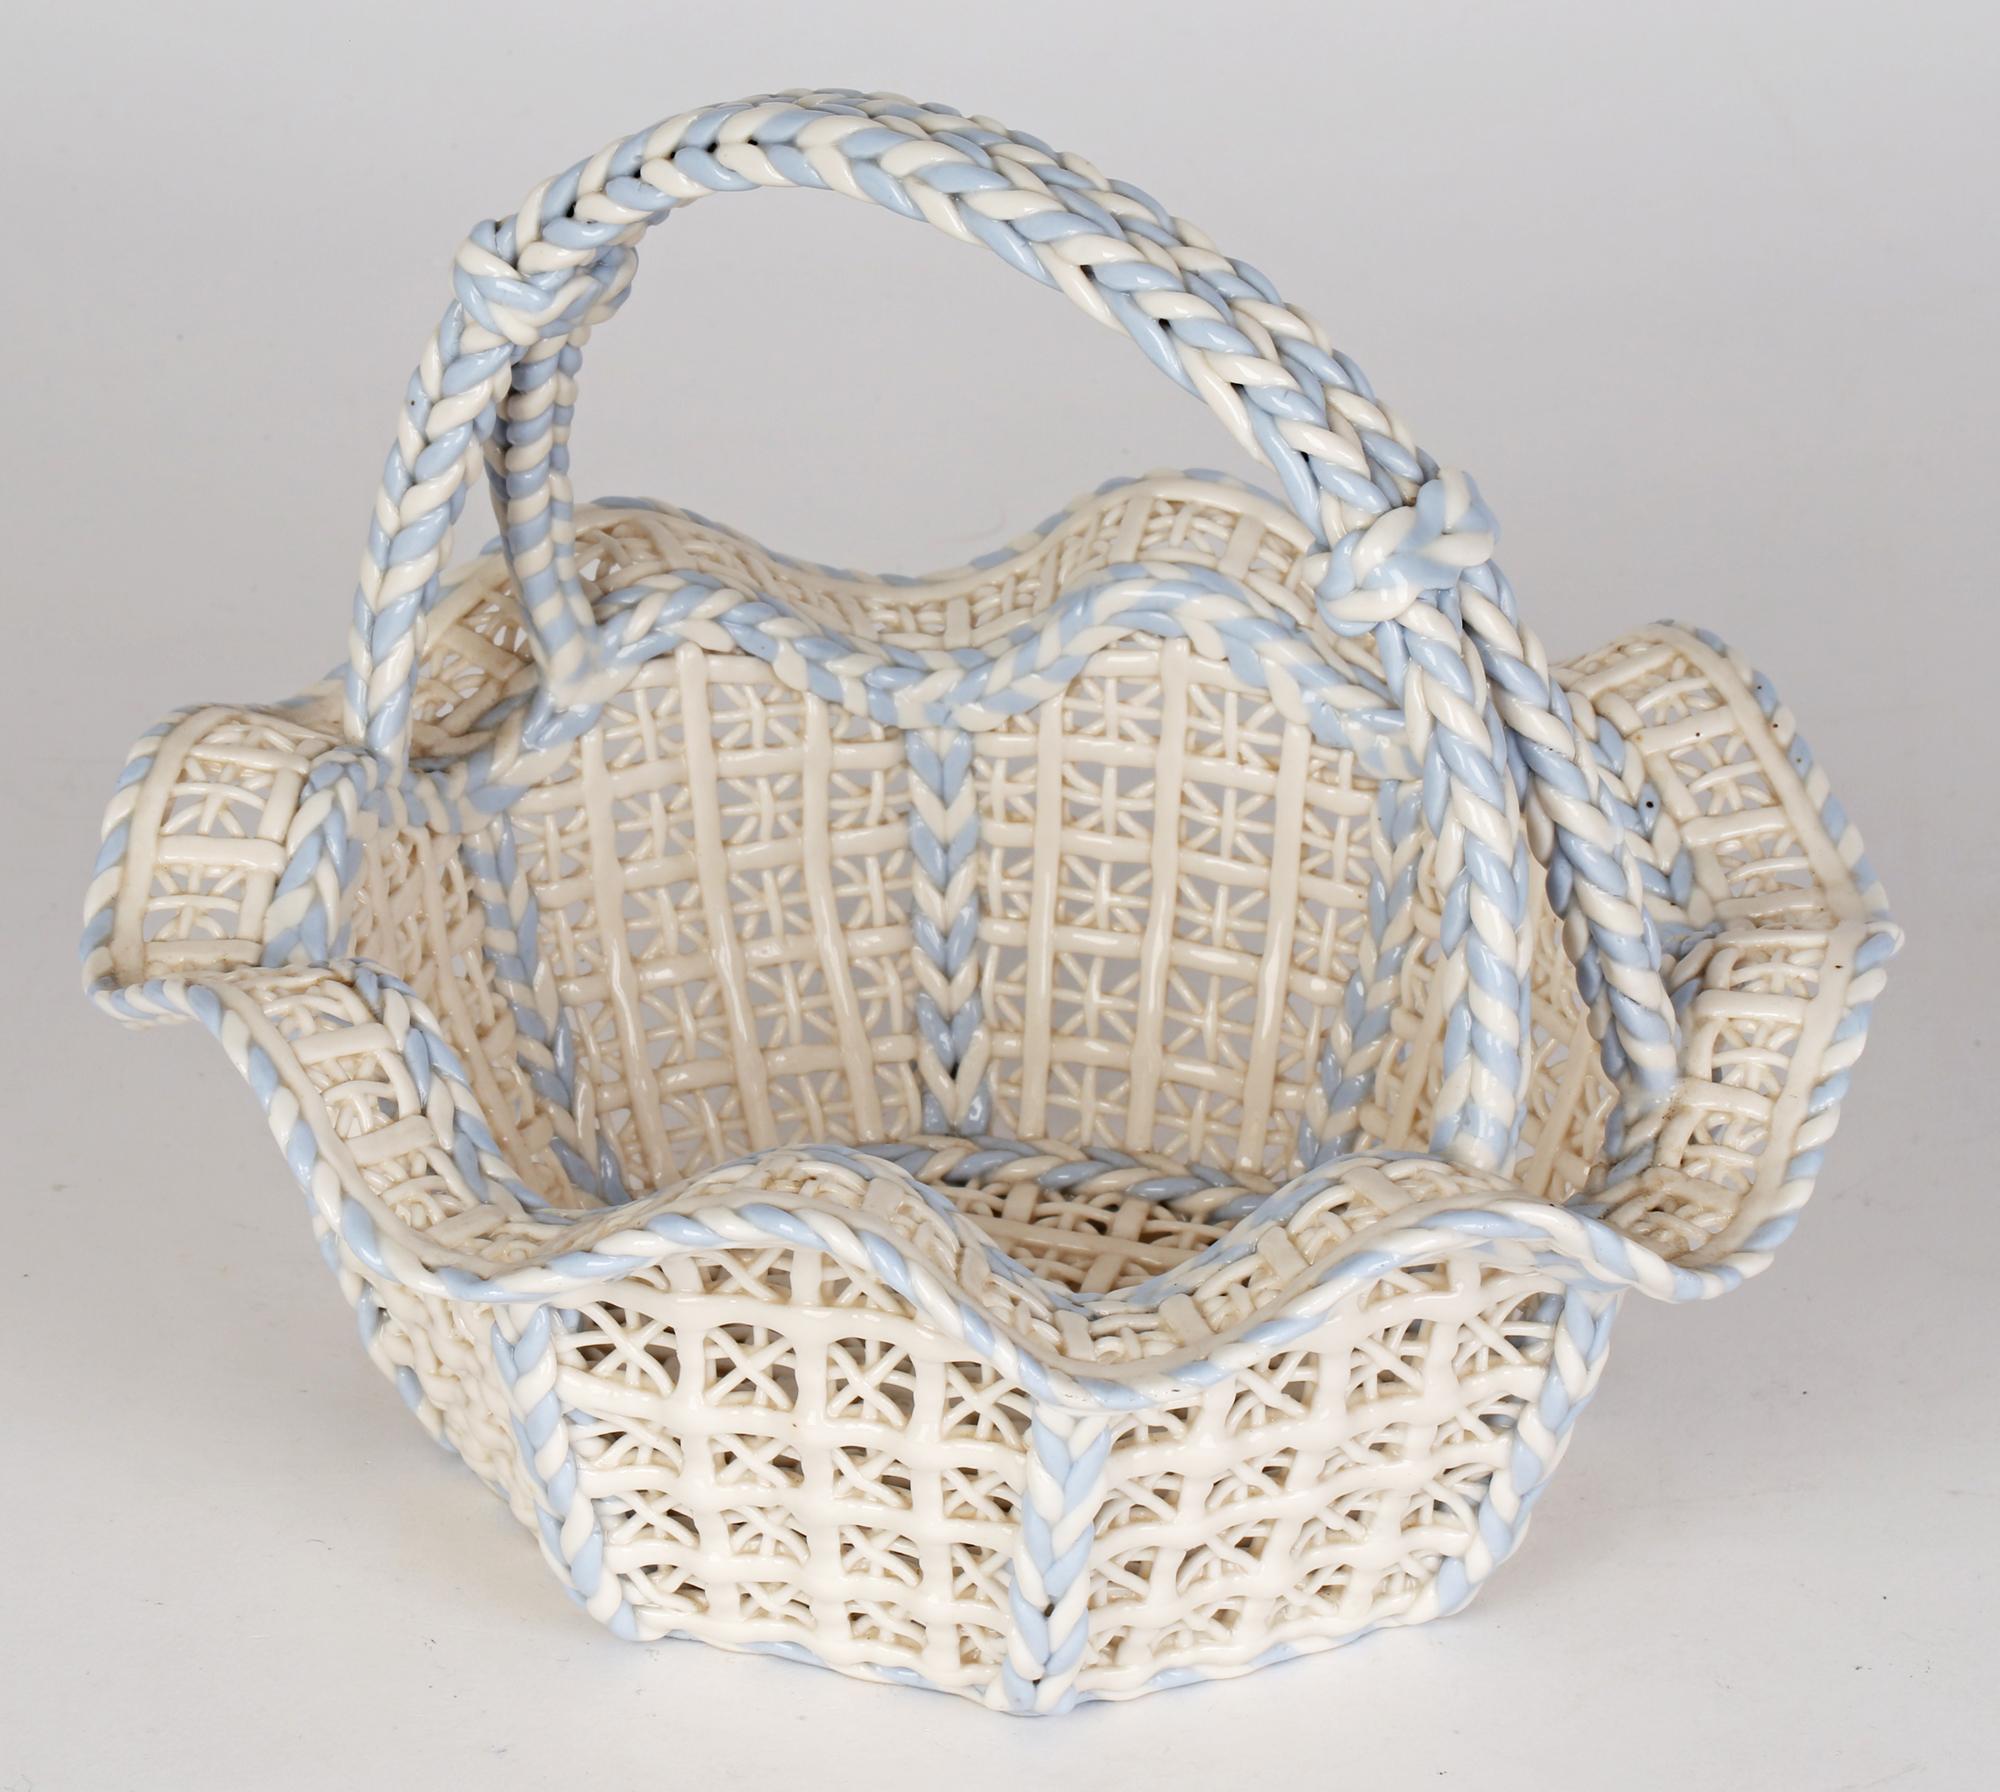 19th Century Antique Exceptional and Rare English Attributed Handled Porcelain Basket